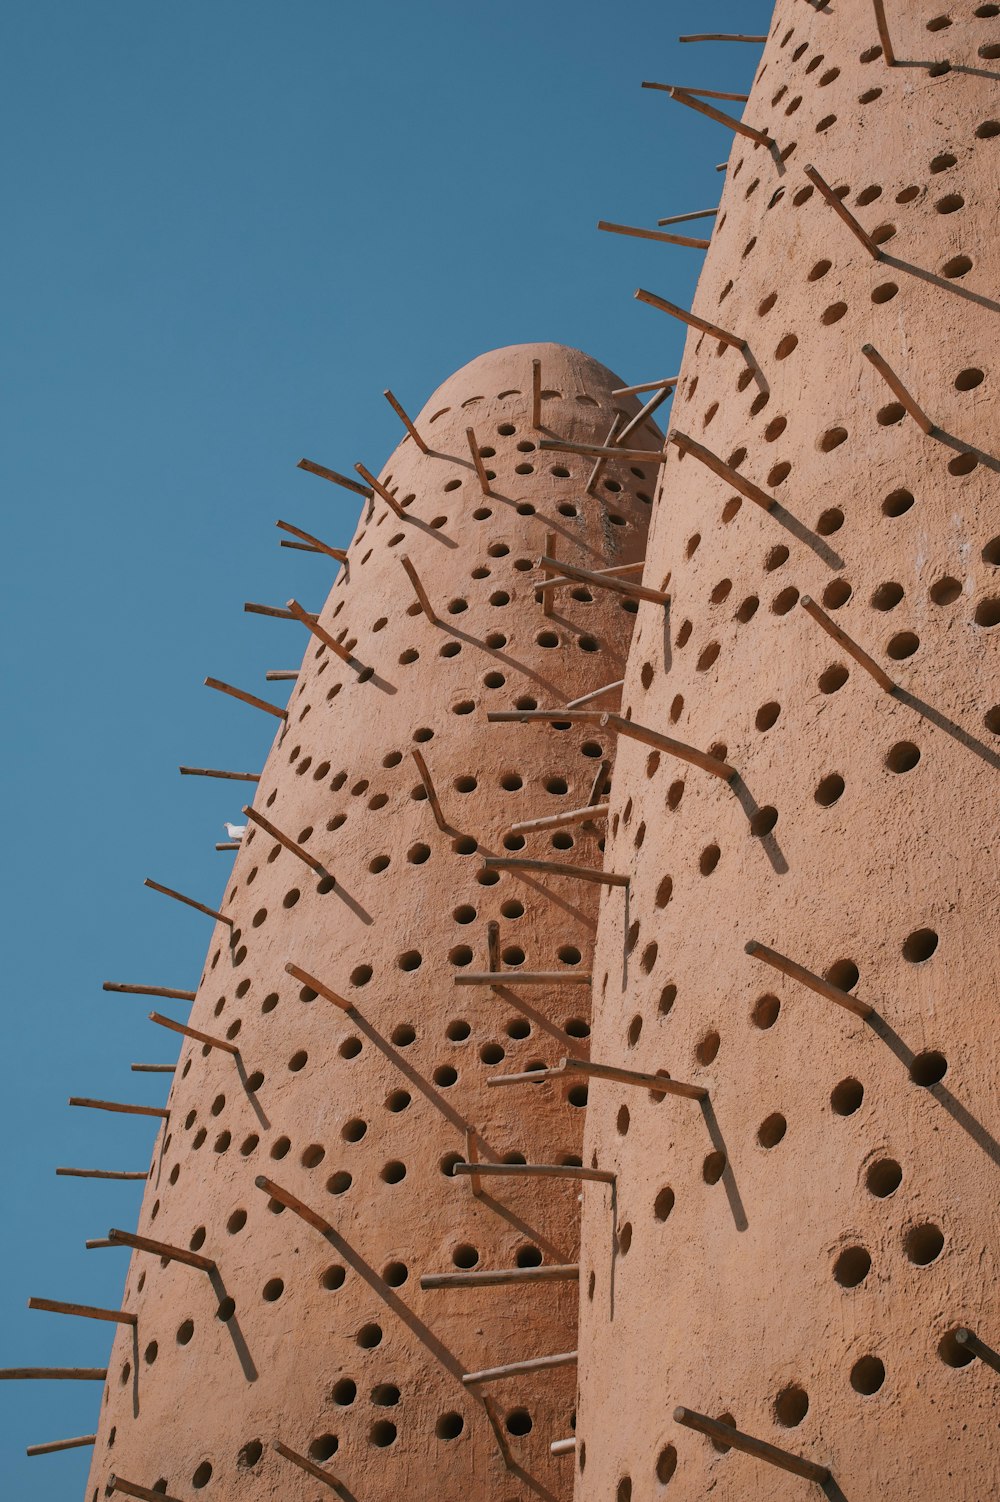 a close up of a building with spikes on it